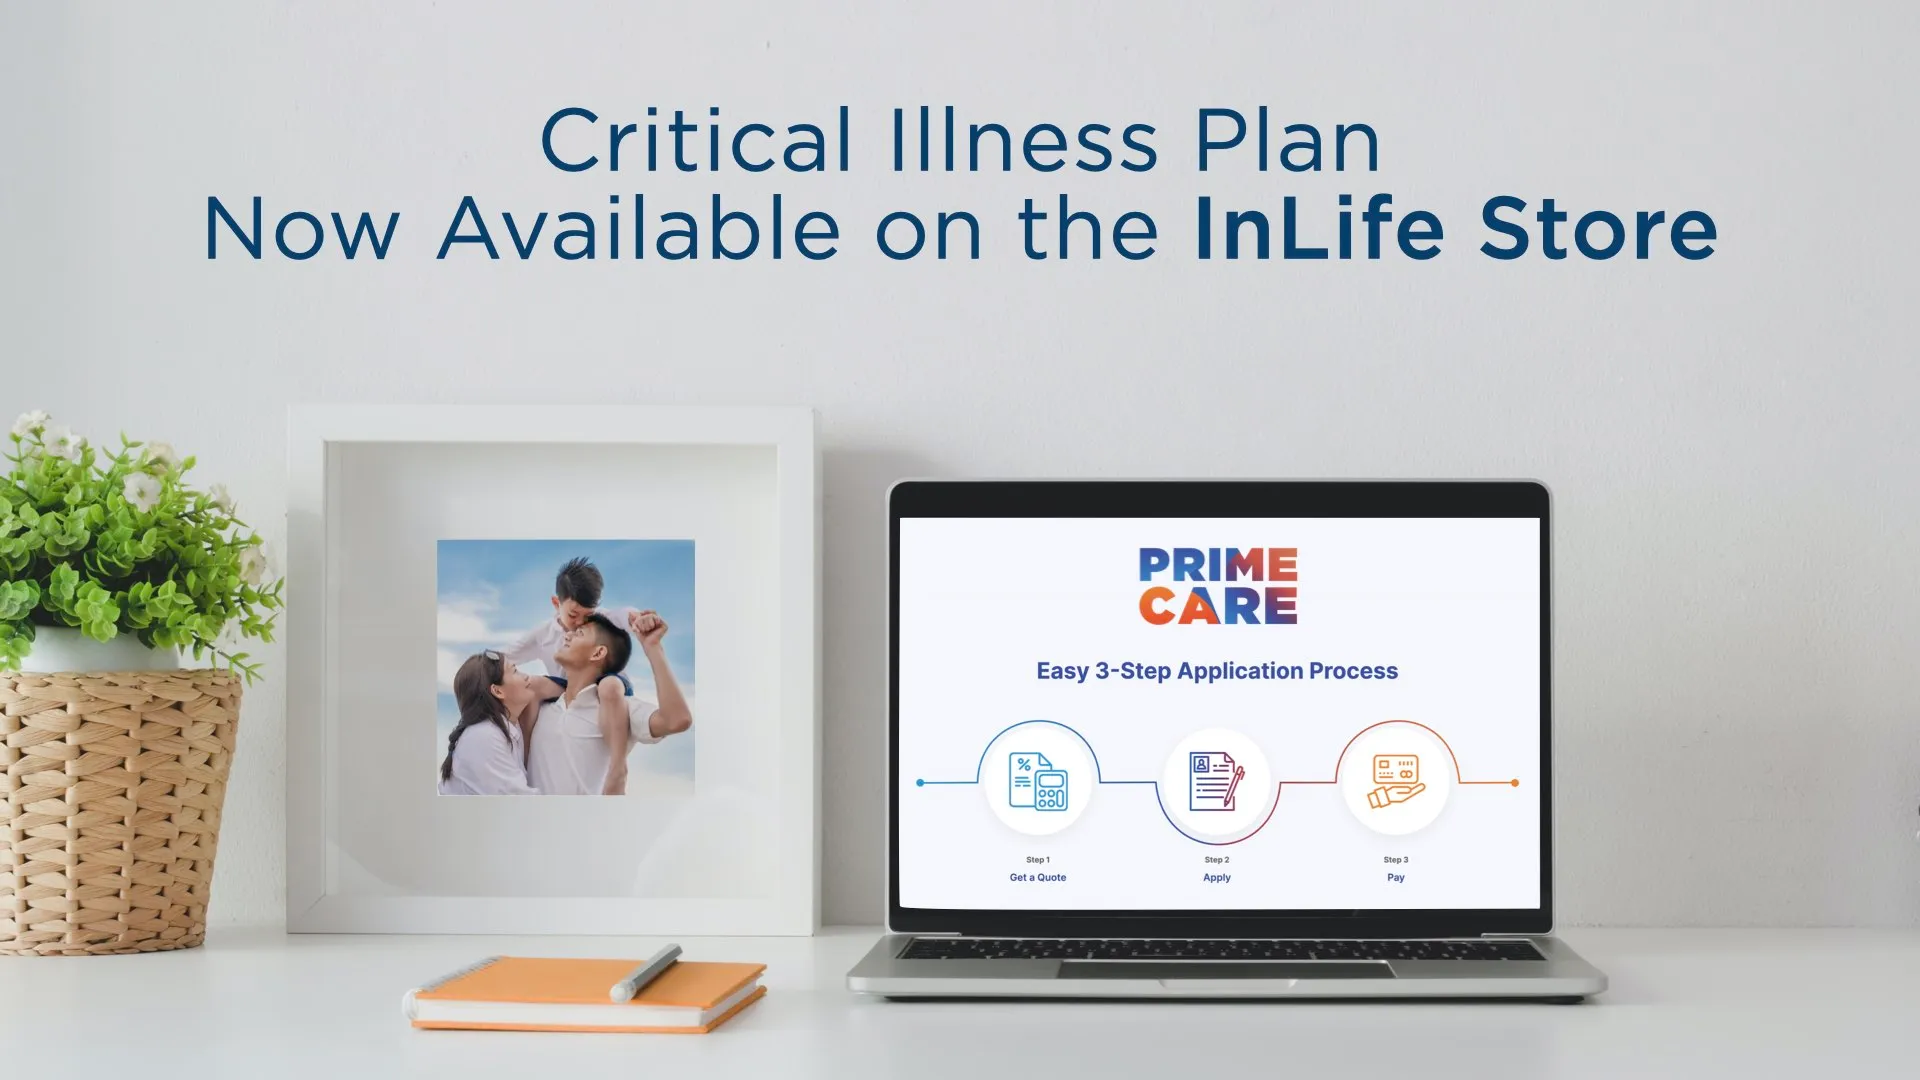 prime-care-for-critical-illness-now-in-the-inlife-store